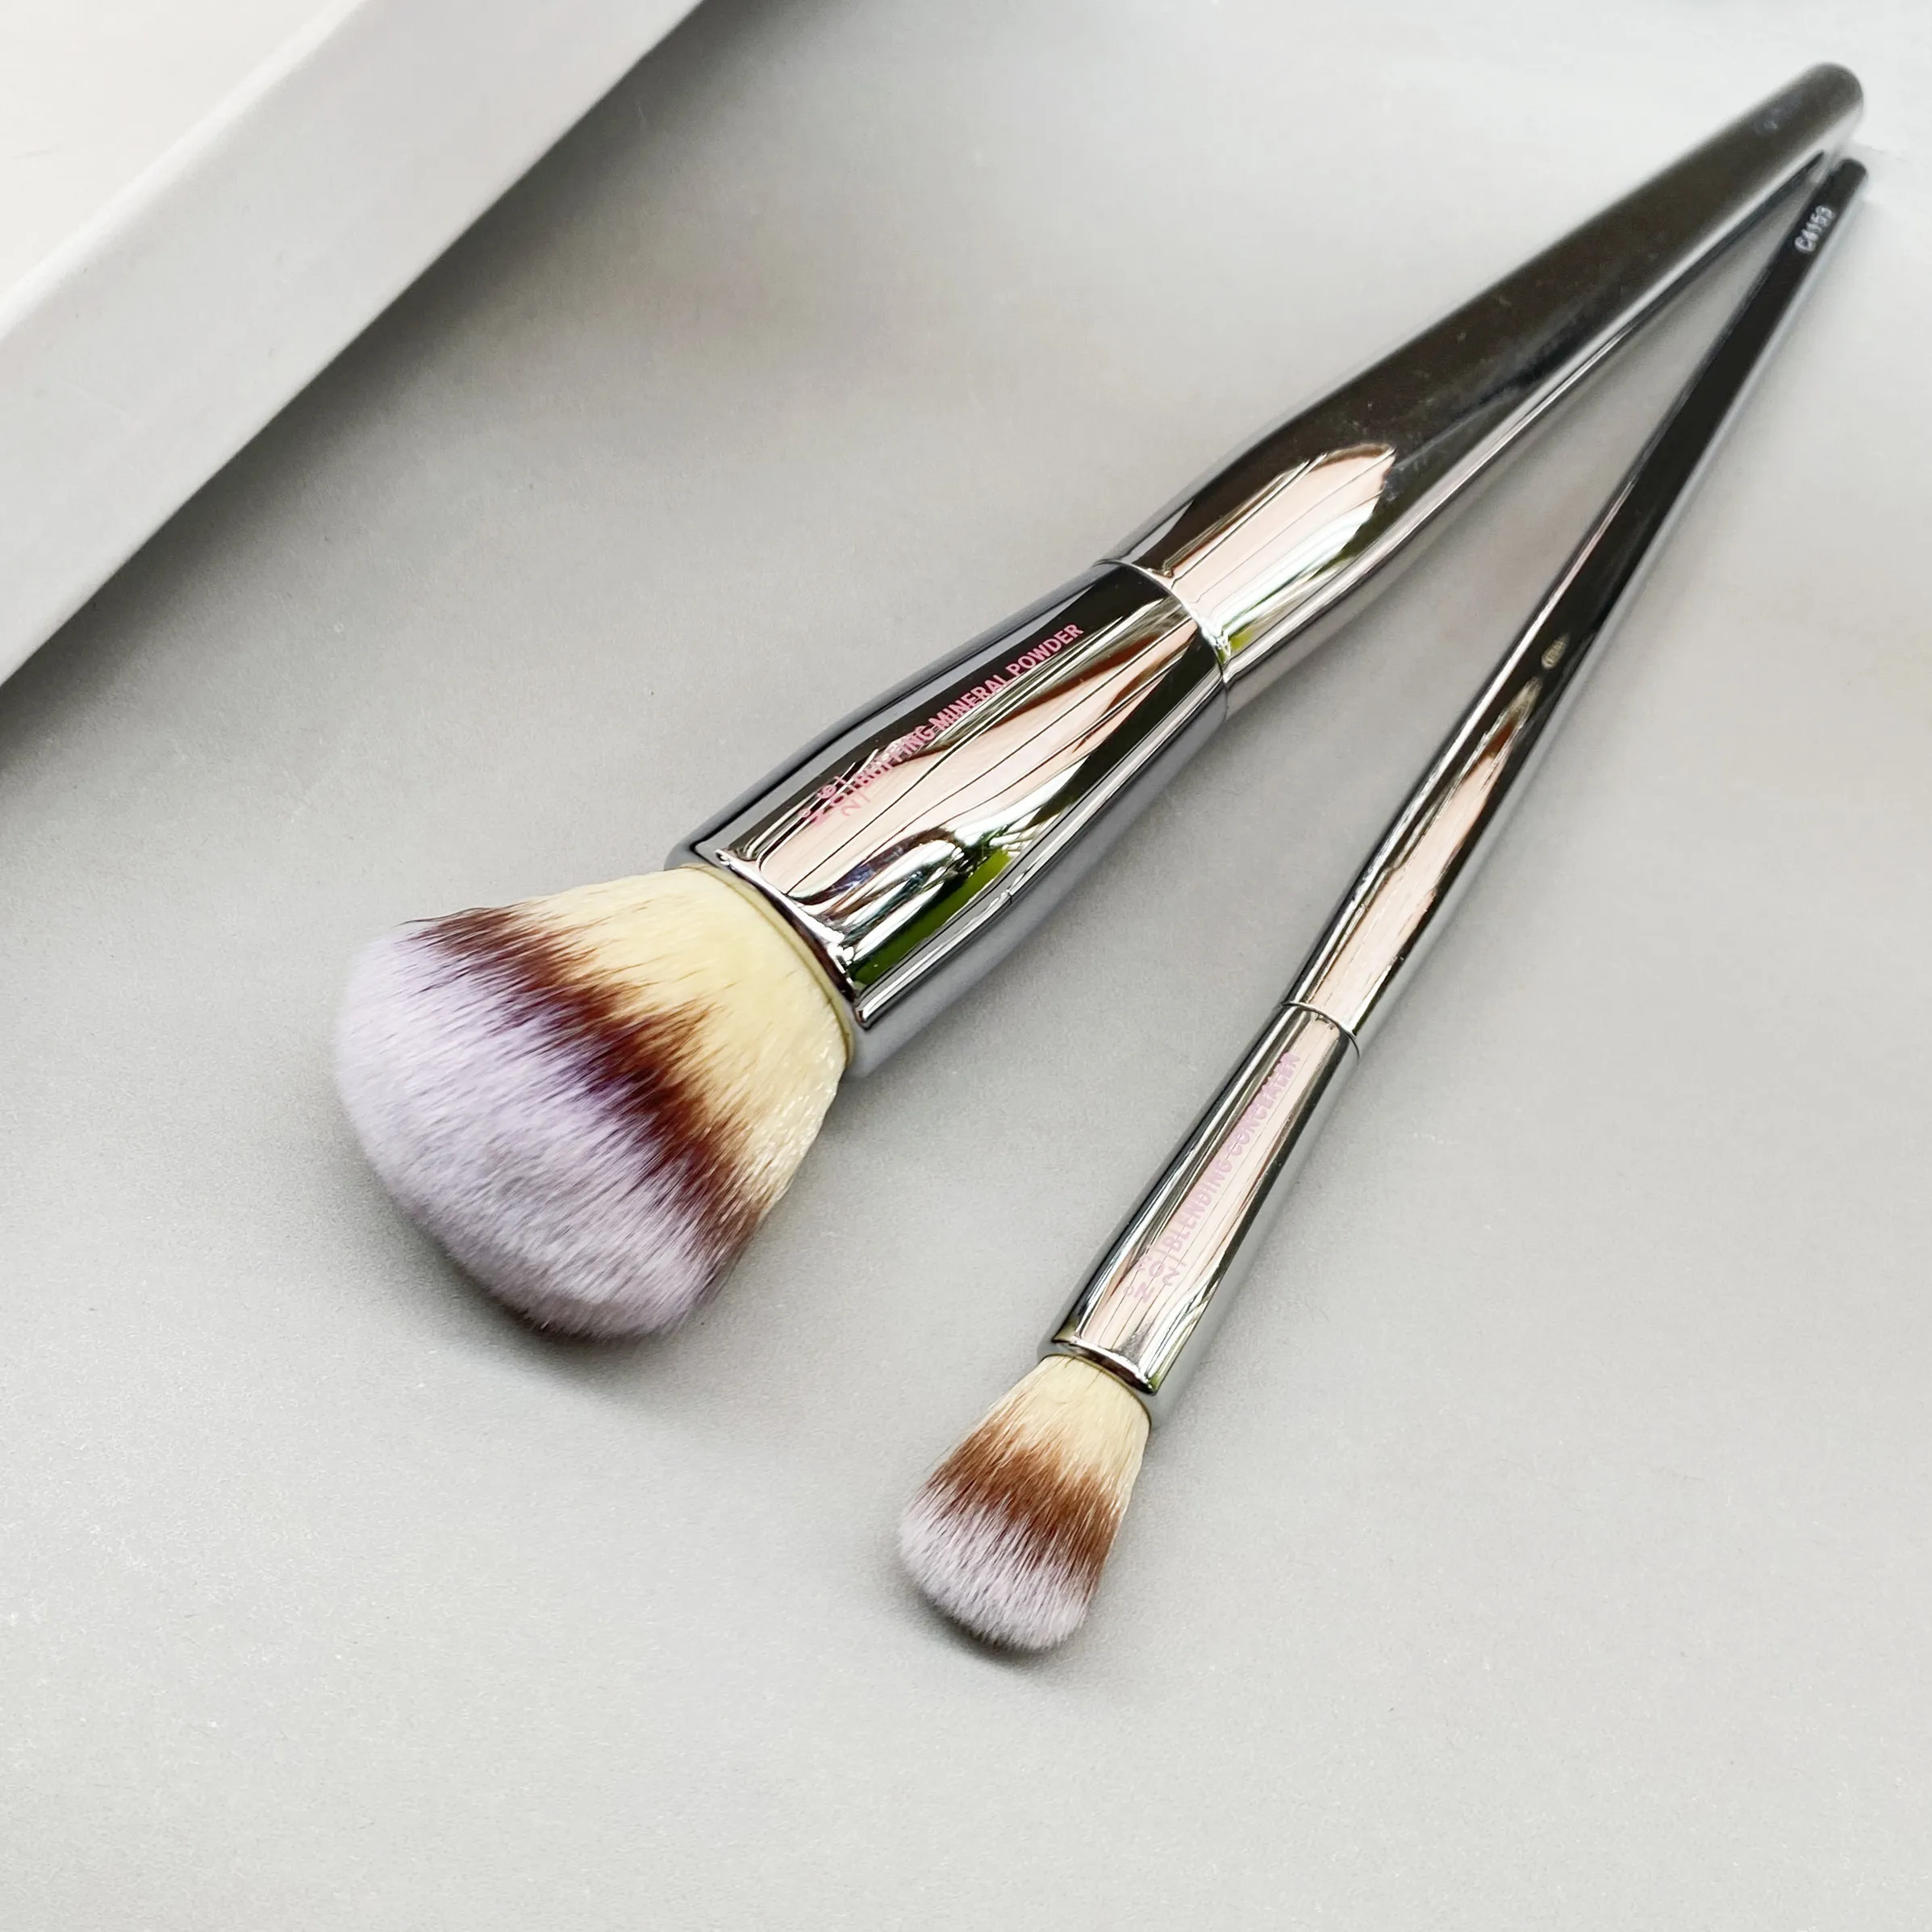 

Love Beauty Fully Makeup Brushes Blending Concealer 203 Buffing Mineral Powder 206 - Round Foundation Eyeshadow Cosmetics Tools